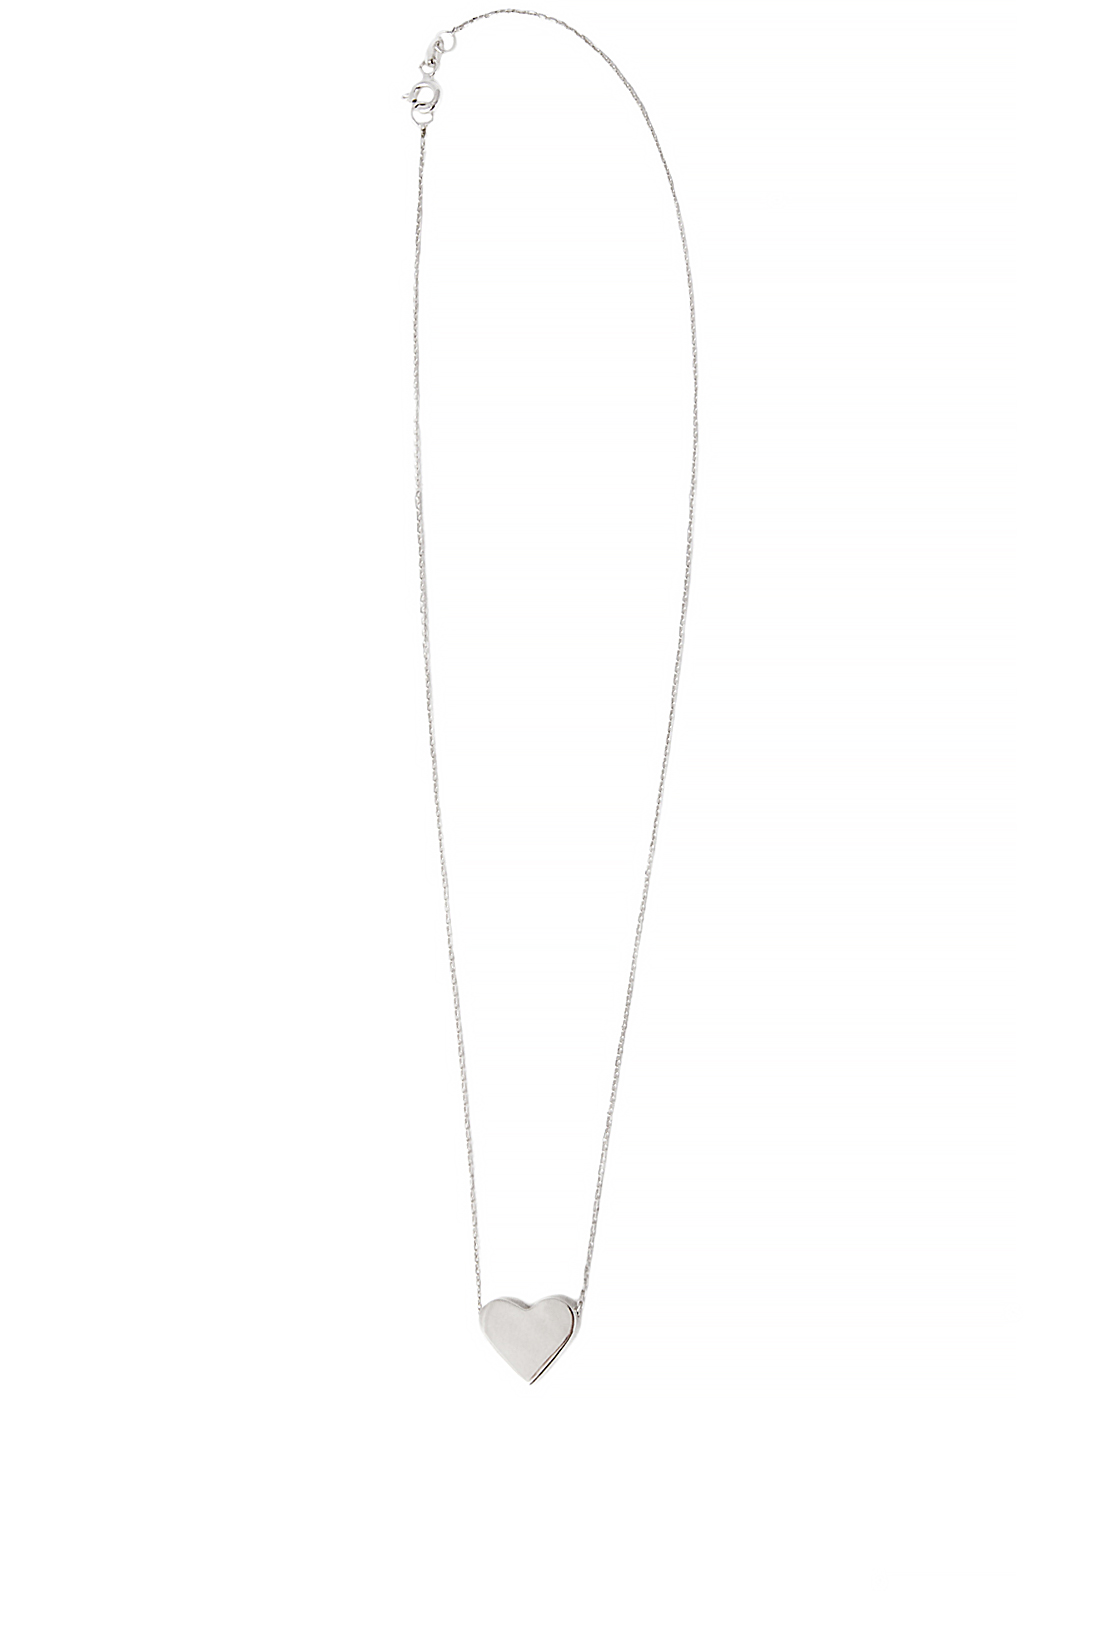 'Heart' silver necklace Snob. image 0